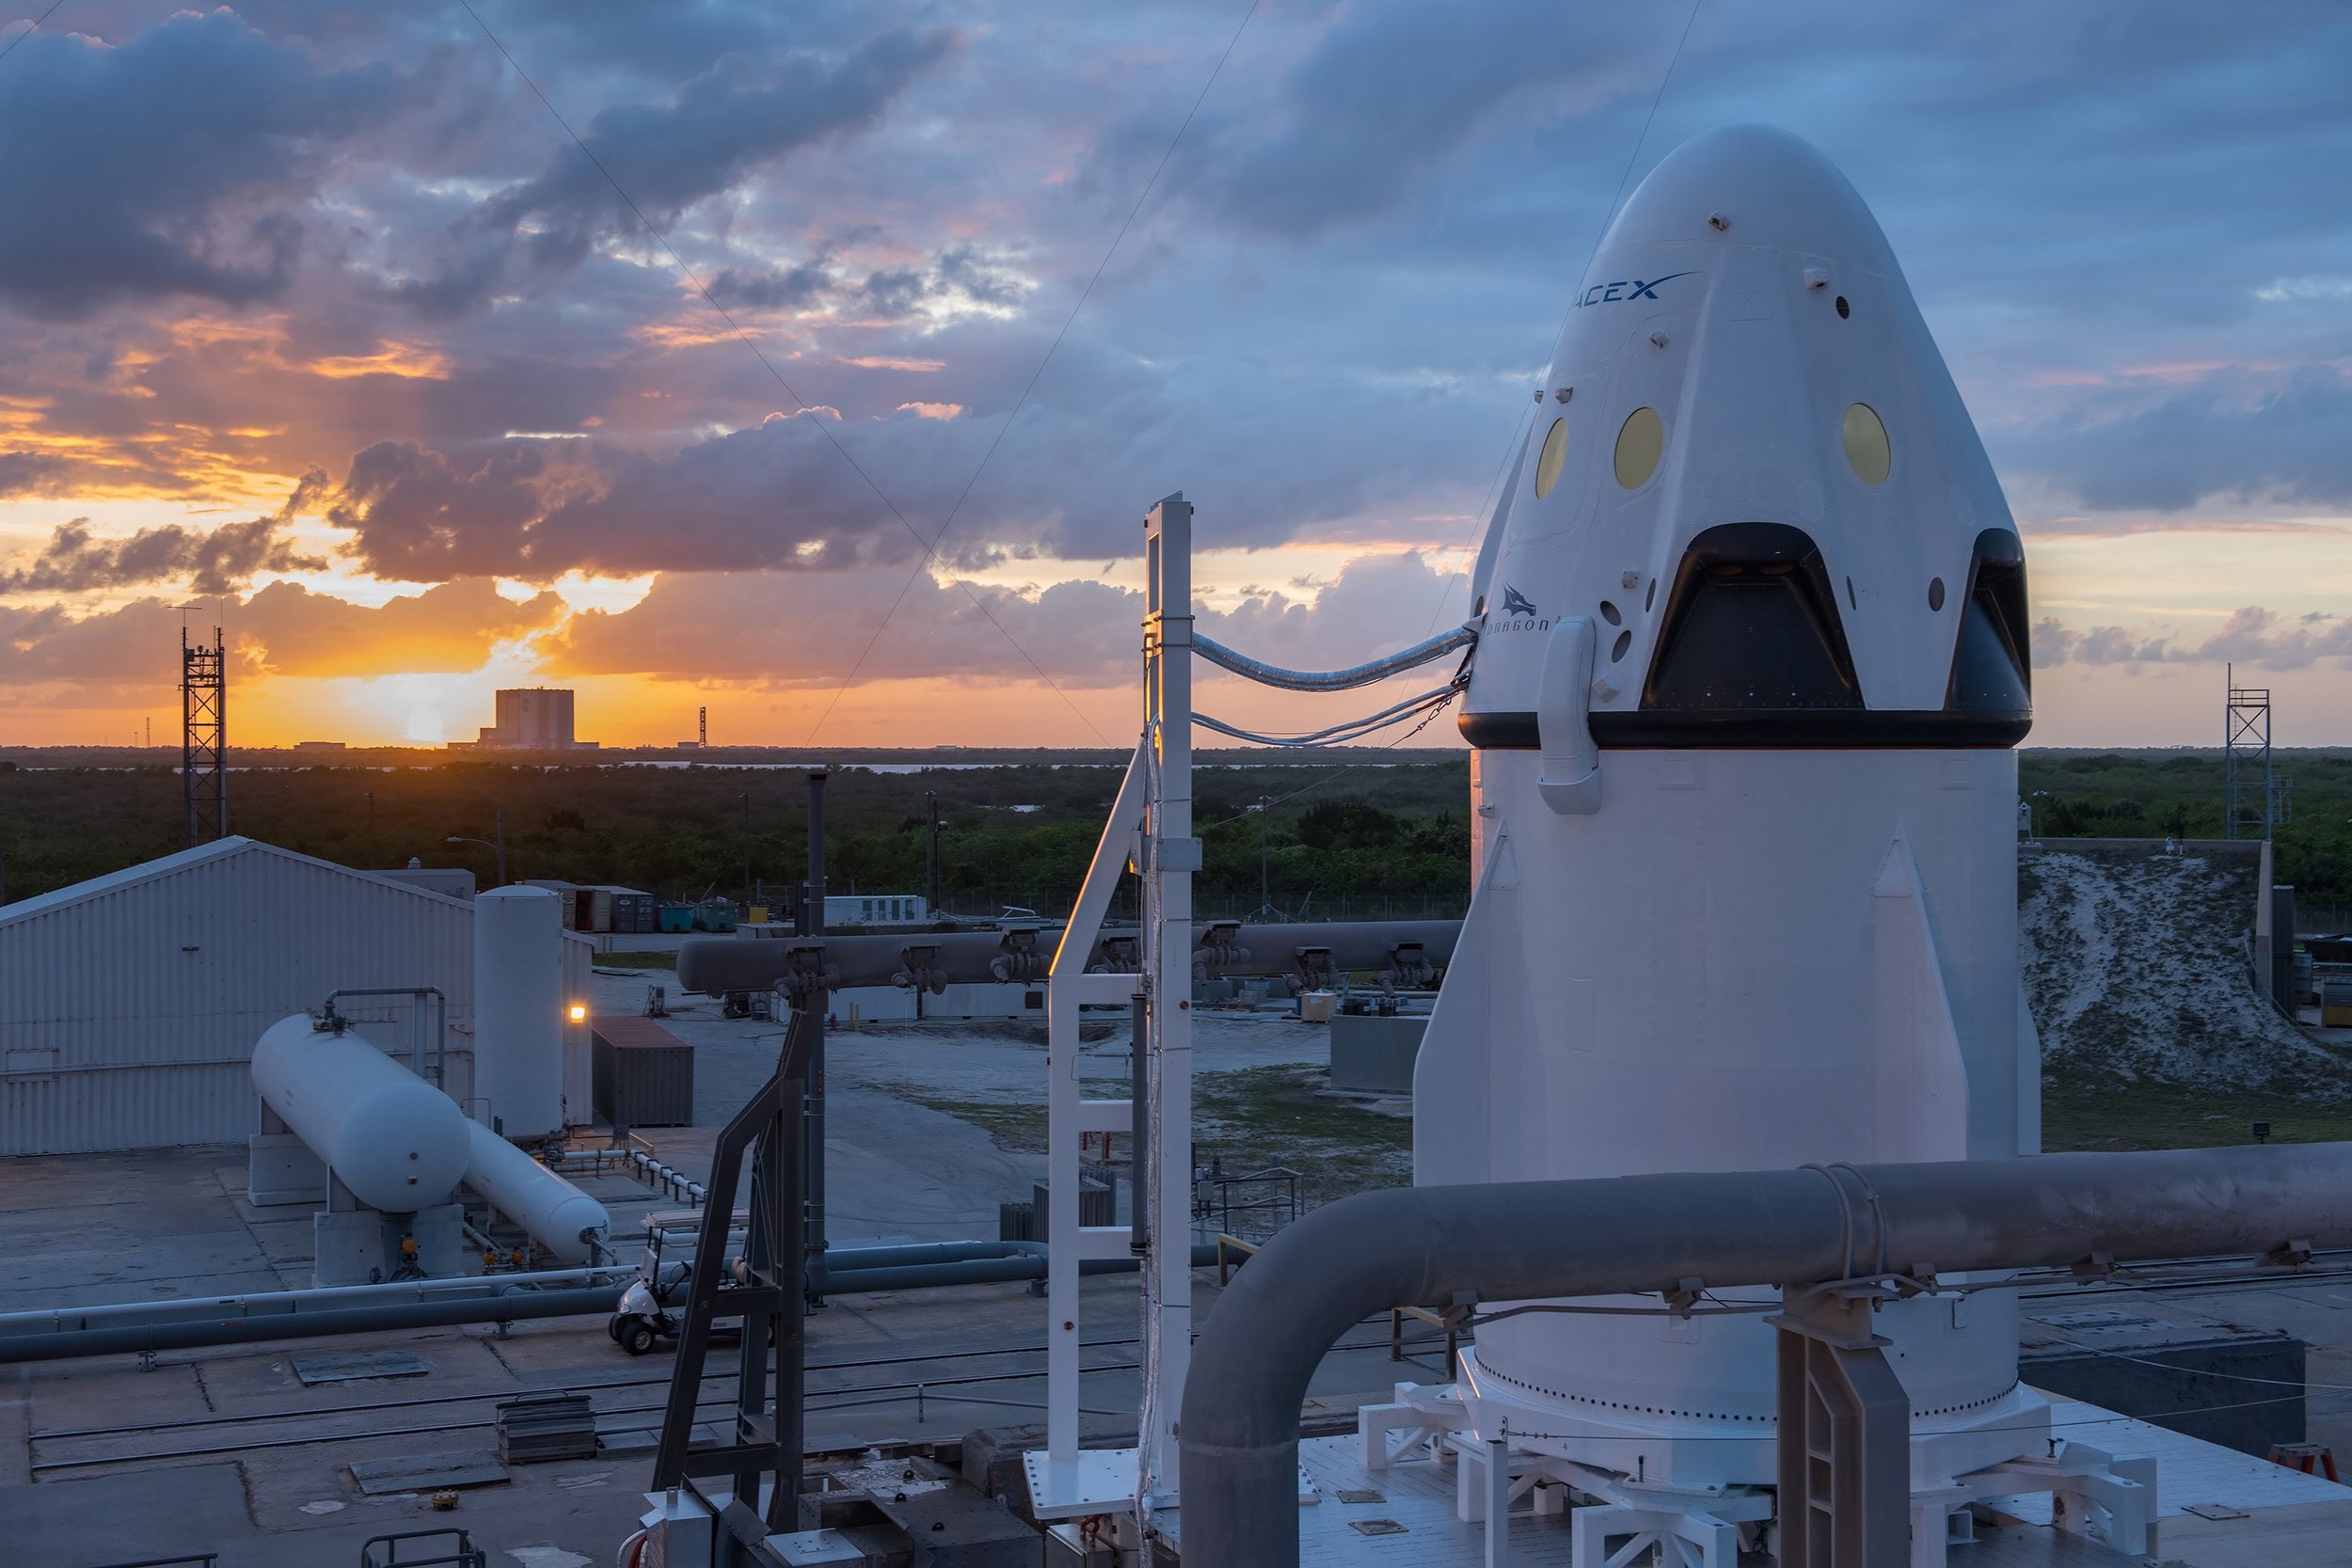  The Pad Abort Crew Dragon the morning of the test on May 6, 2015. Photo Credit: SpaceX 